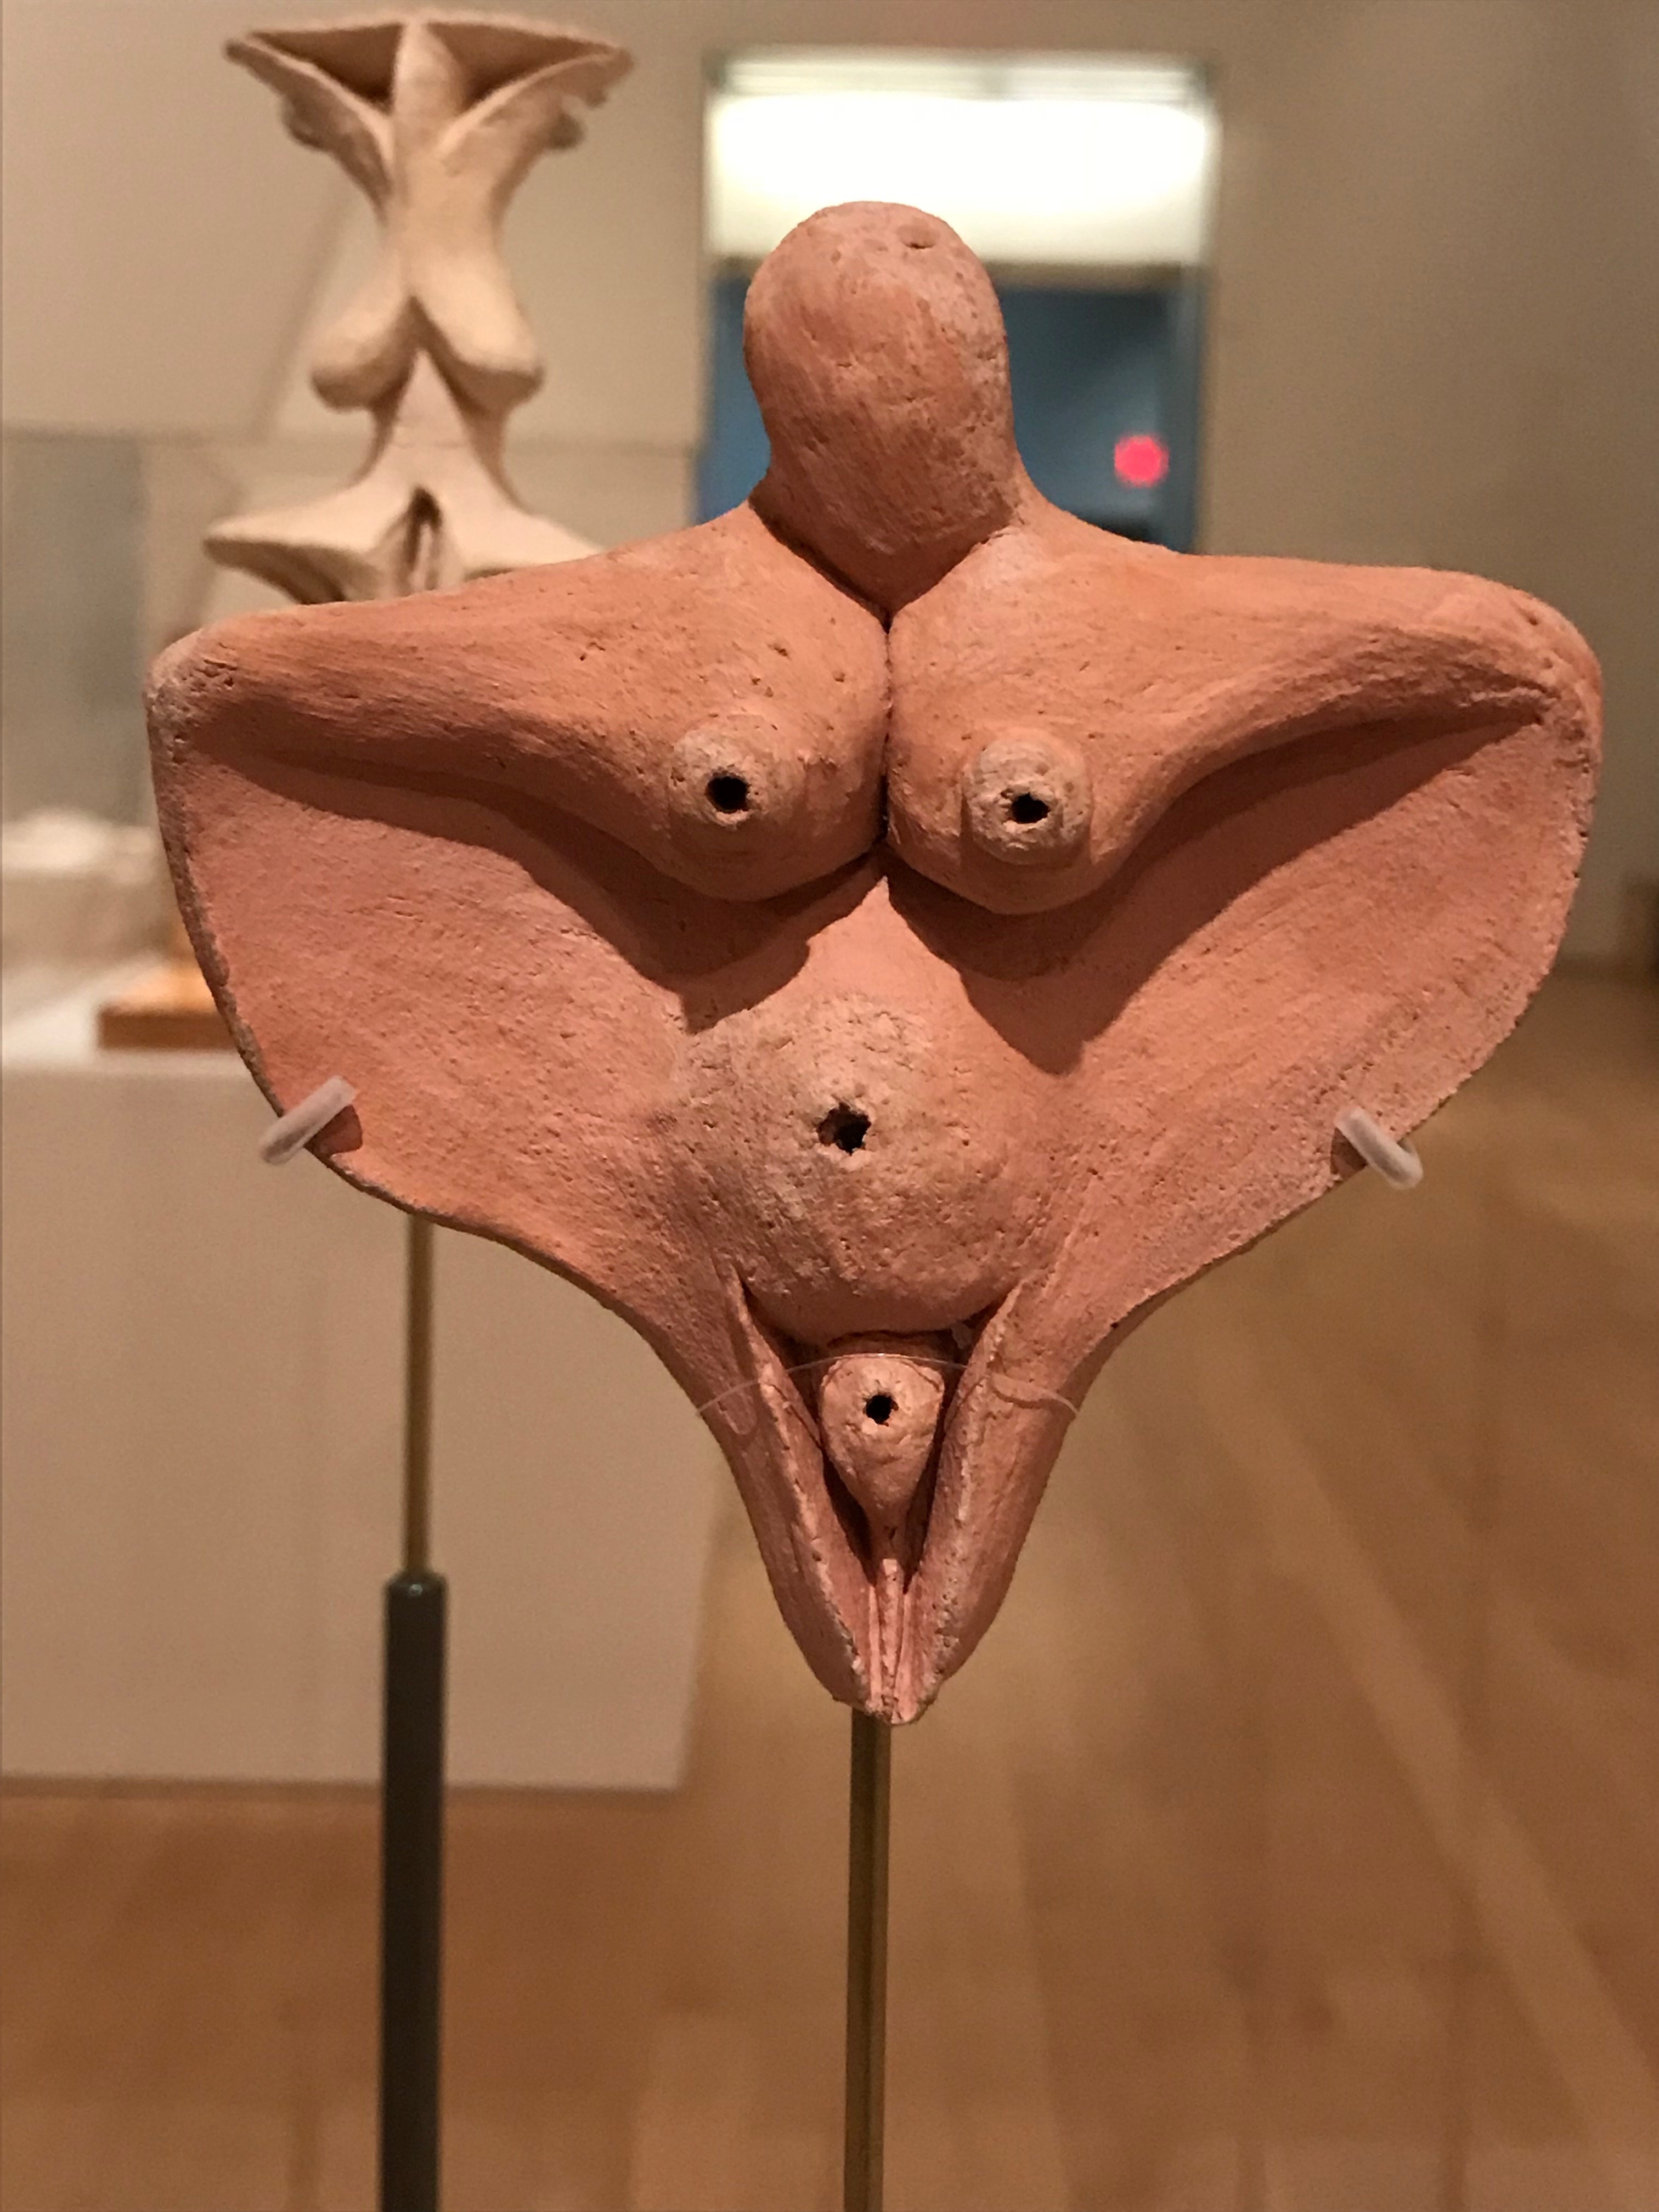 A "Ceramic Goddess" on display at the Elizabeth A. Sackler Center for Feminist Art in the Brooklyn Museum in New York City. (DCNF/Ethan Barton)